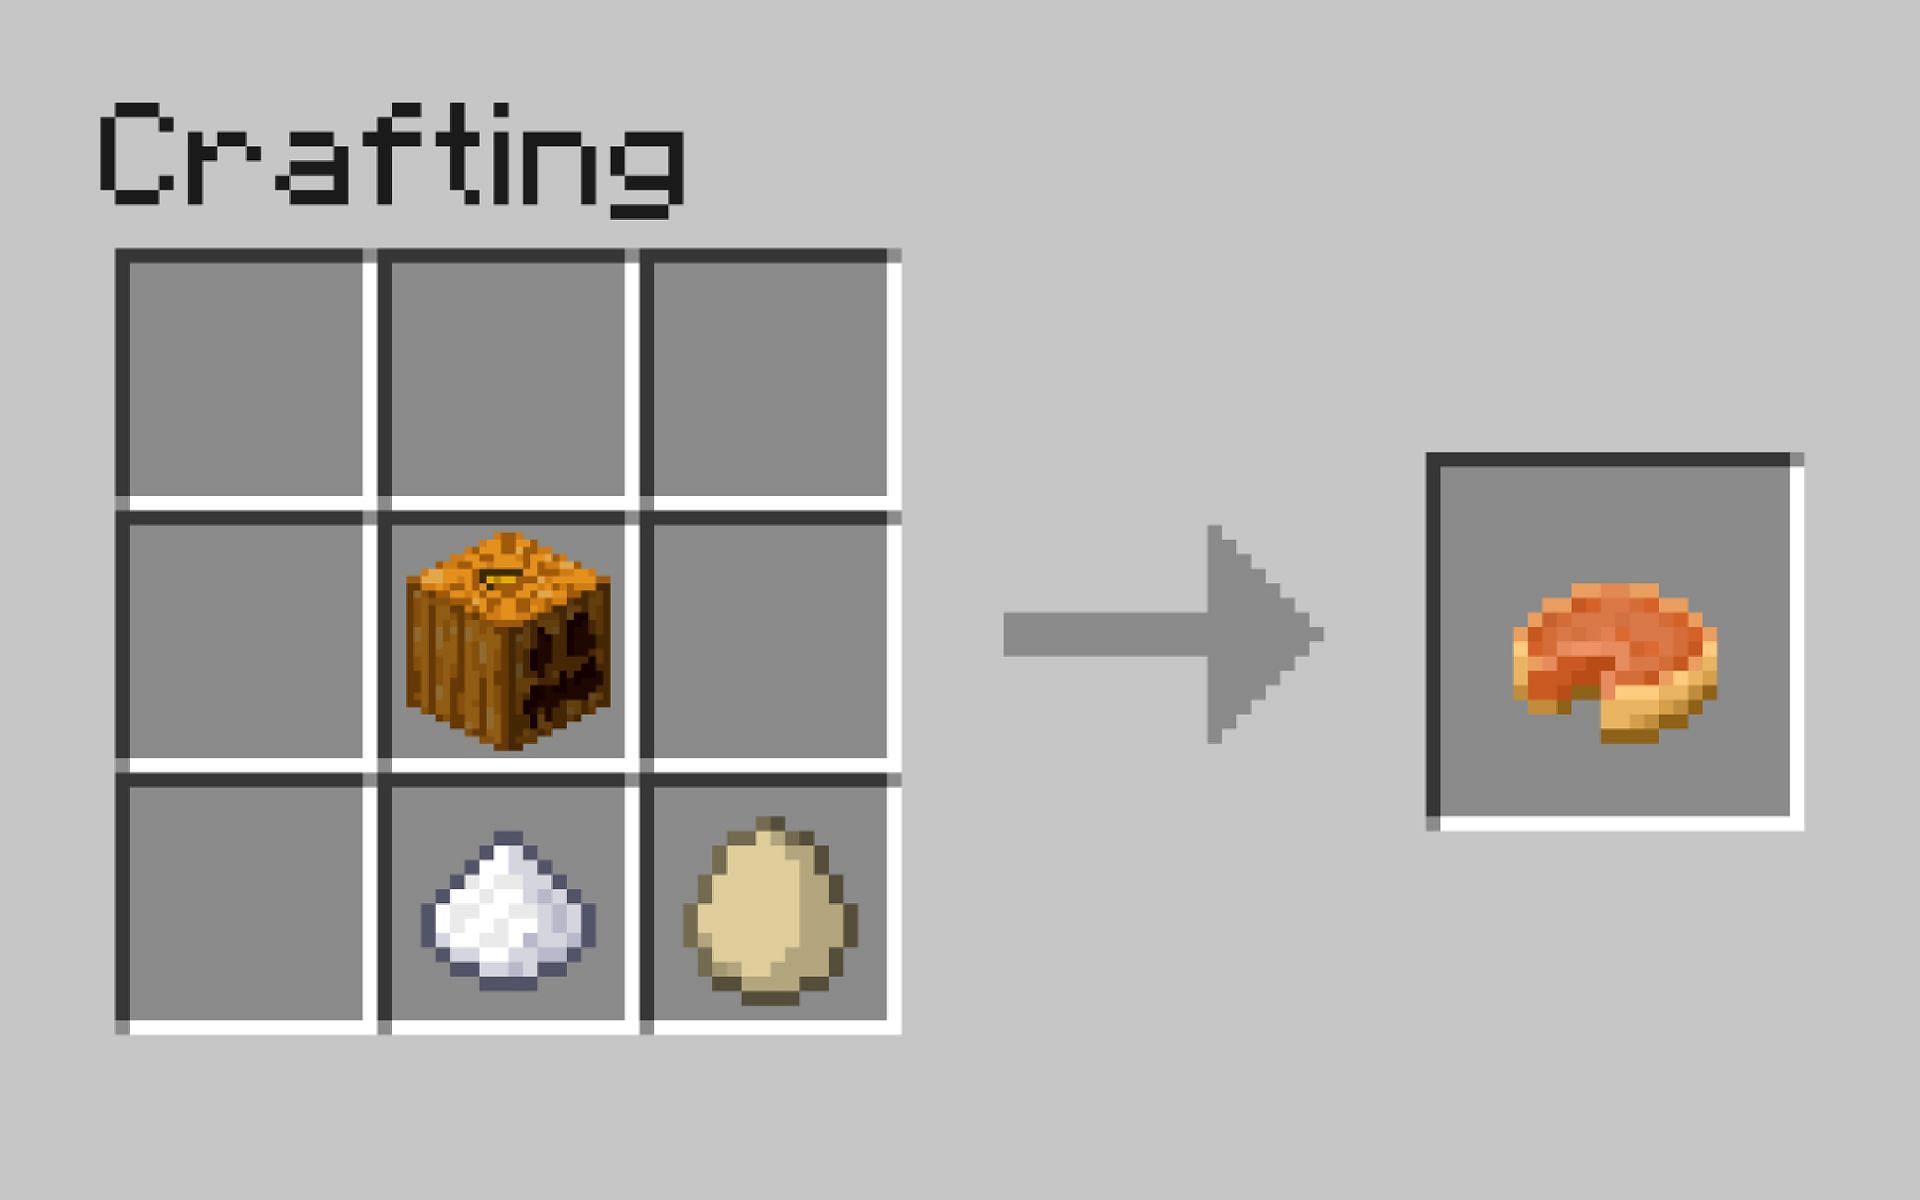 Pumpkin pie can be made without a crafting table. (Image via Minecraft)